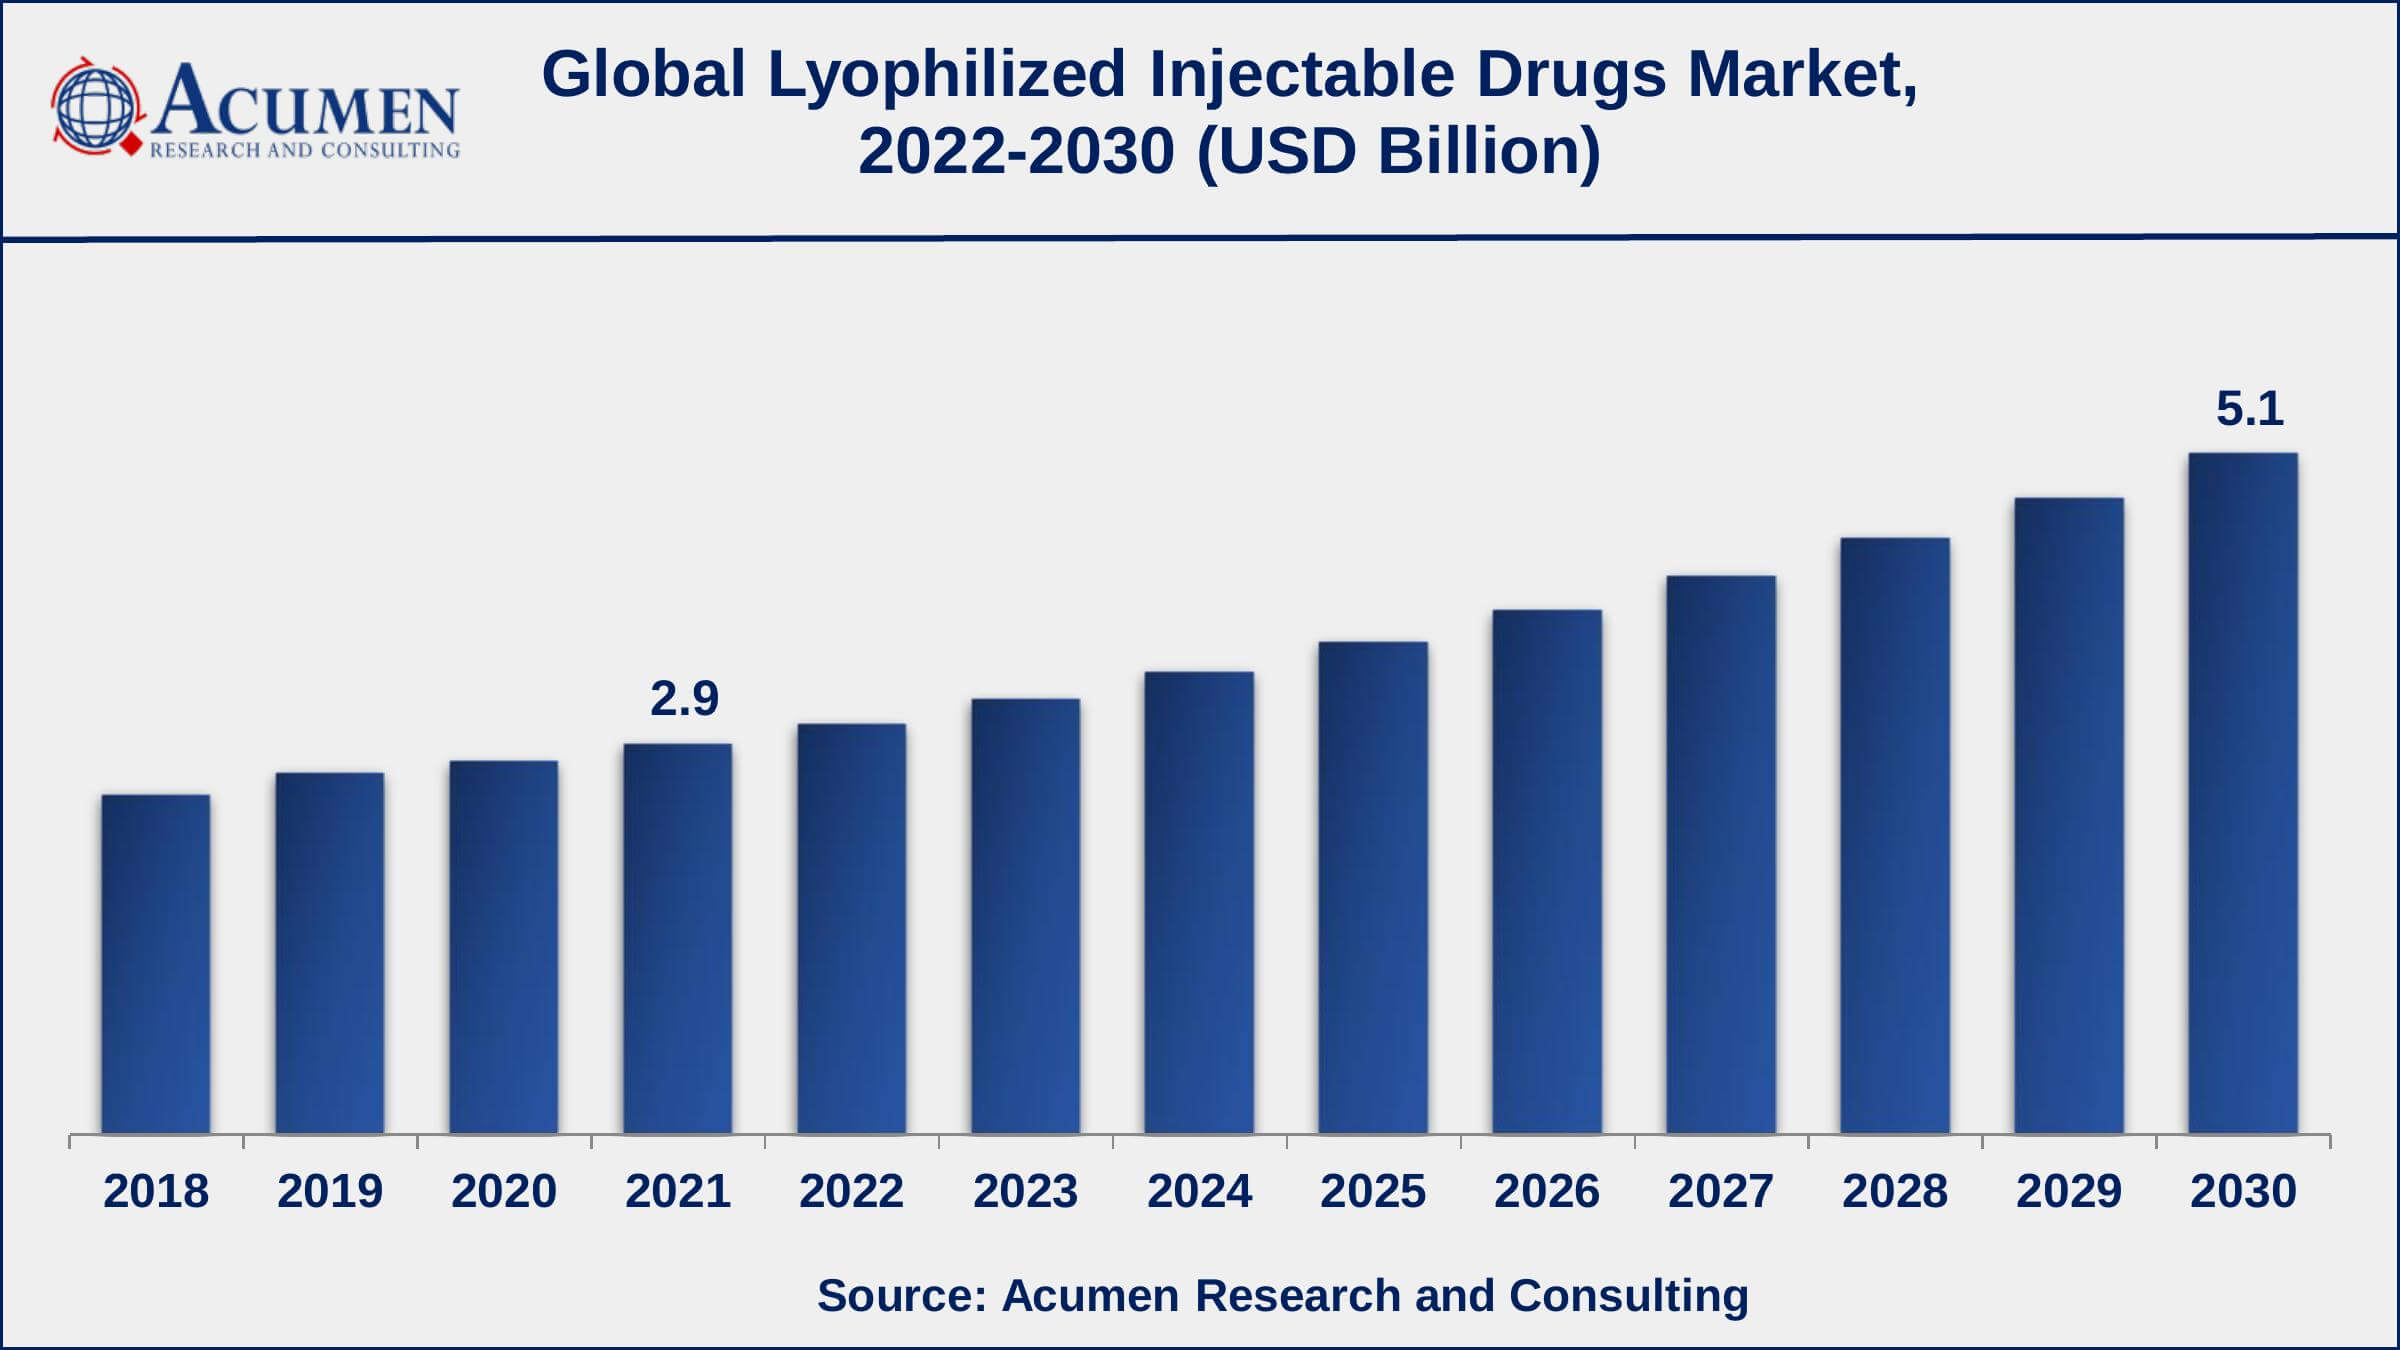 Asia-Pacific lyophilized injectable drugs market growth will register impressive CAGR of over 7% from 2022 to 2030